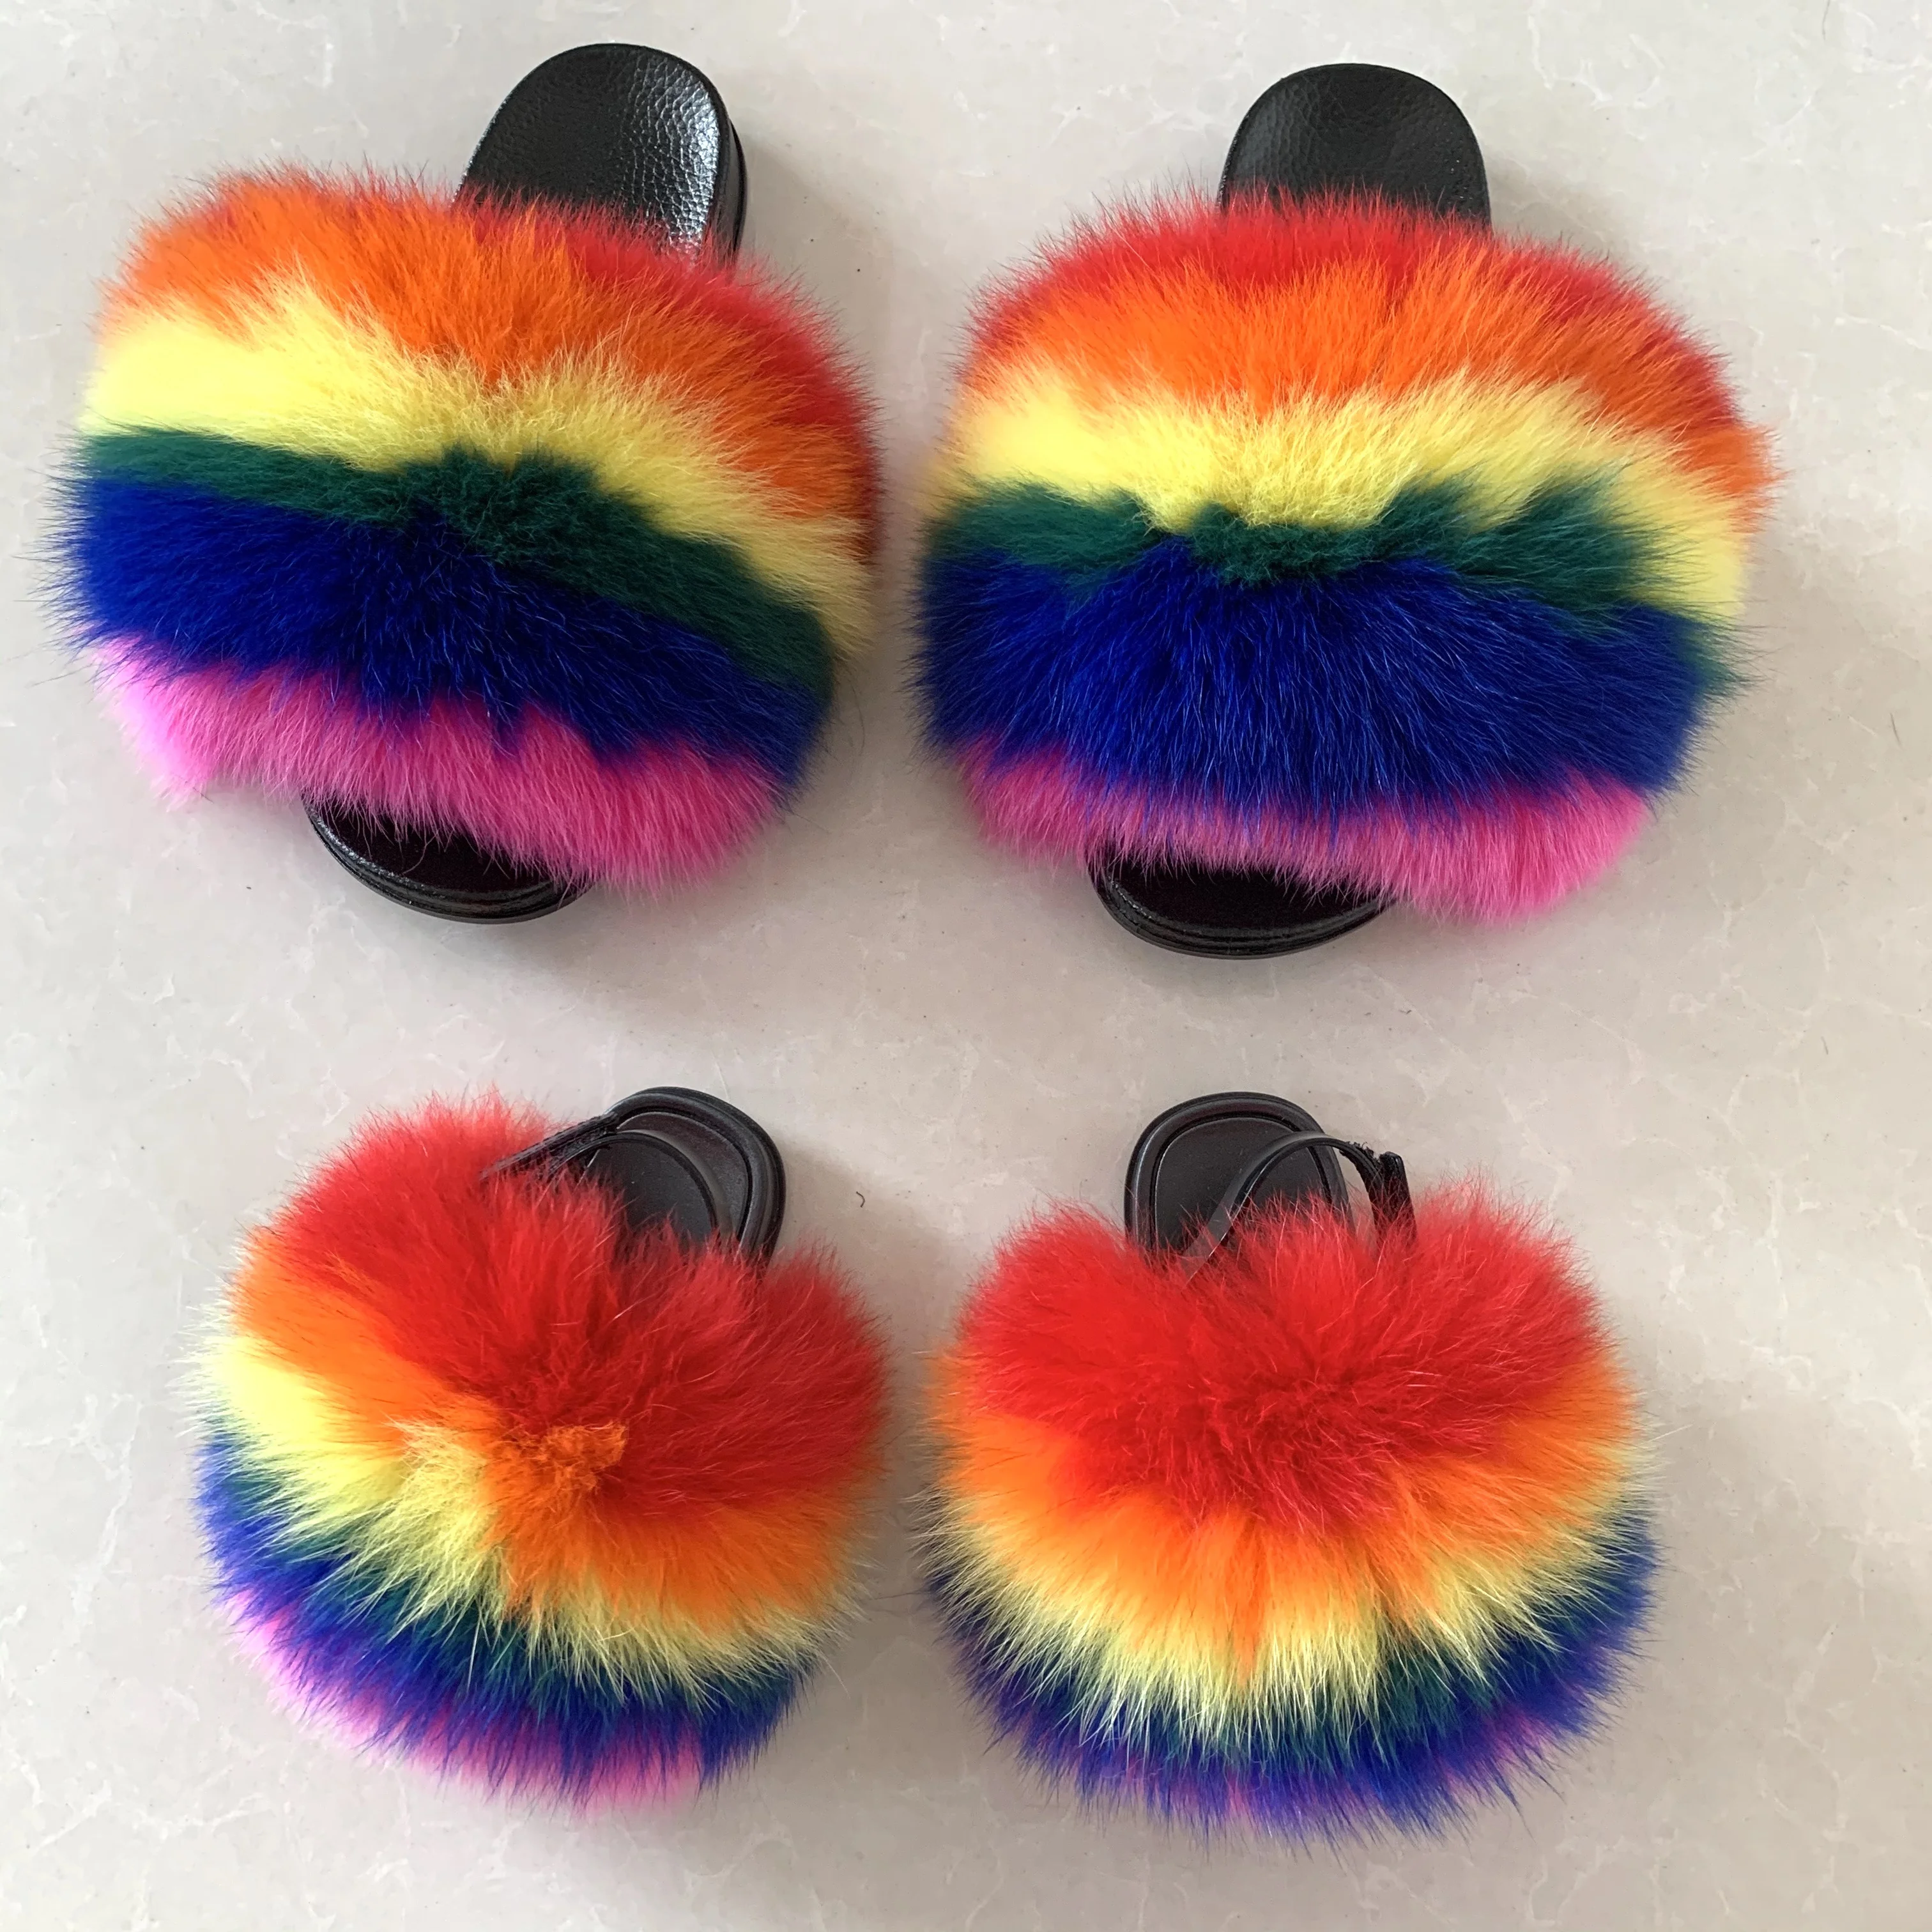 

New style soft and fluffy fur slides sandals soft fox and raccoon fur slippers women, We can dyeing any color